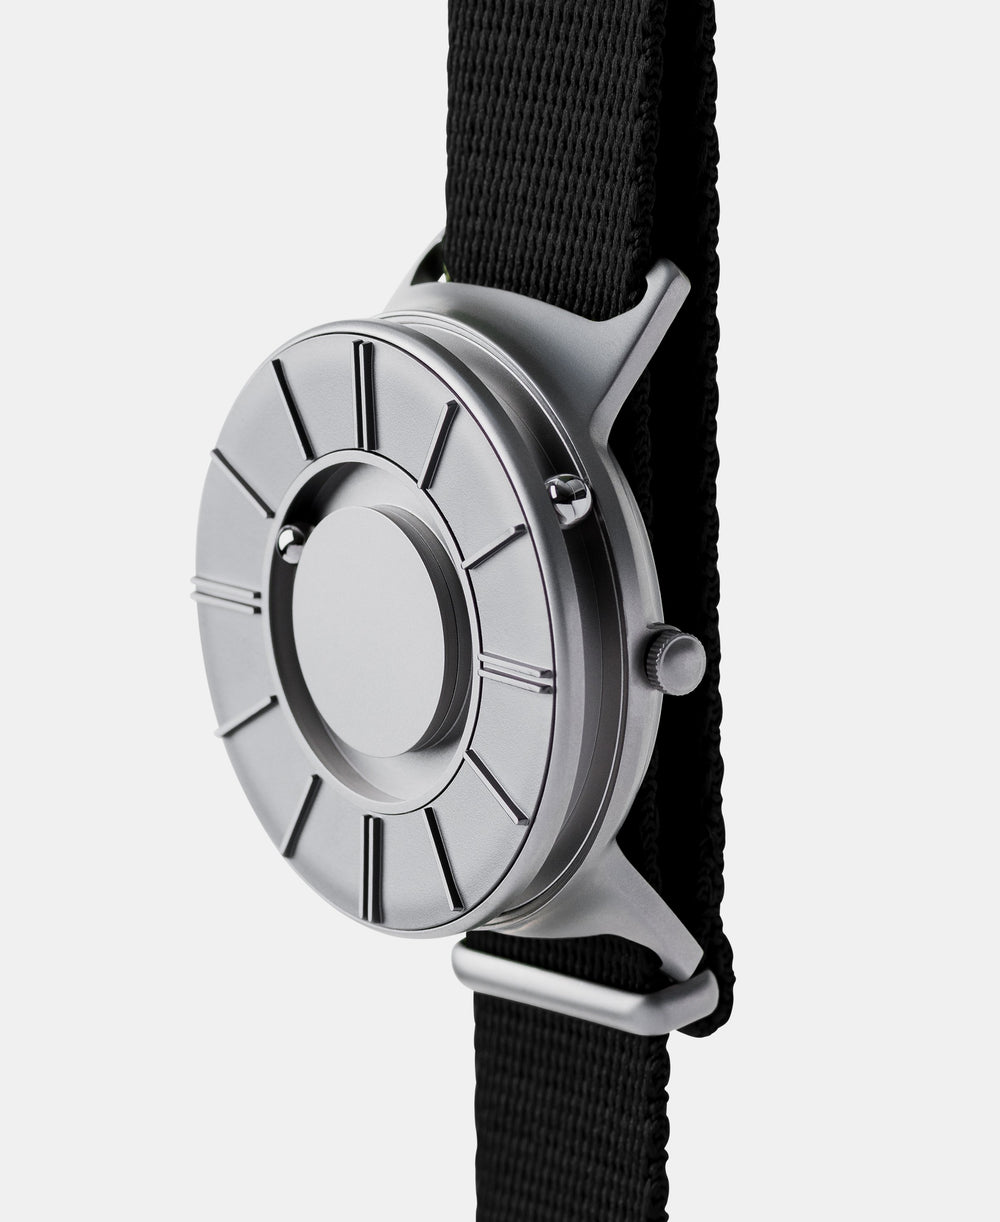 A photo of the watch from a side angle. The recessed track around the outside of the watch face is shown with the hour ball bearing in the track. The raised markers are noticeable from this perspective.